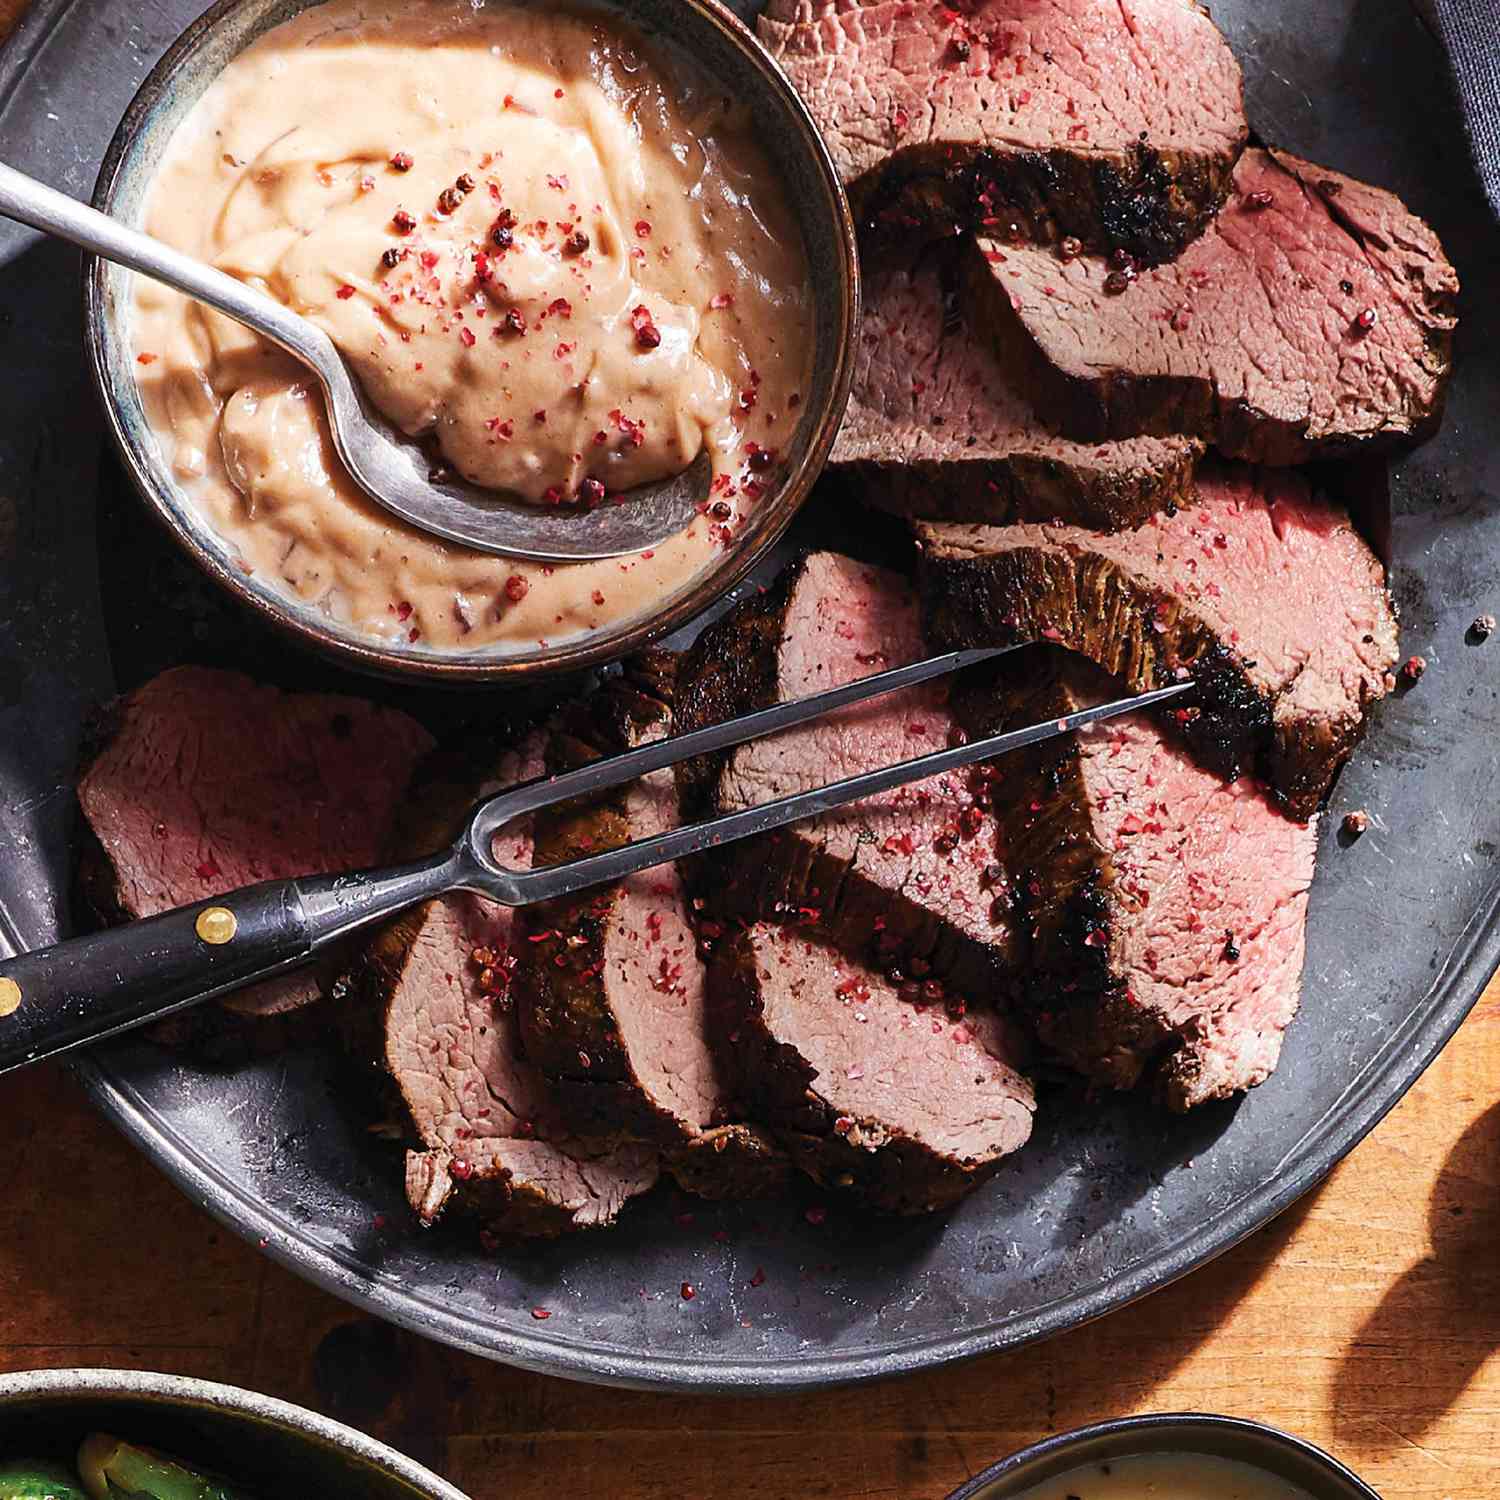 Jalapeño-Marinated Beef Tender with Red Wine Béarnaise